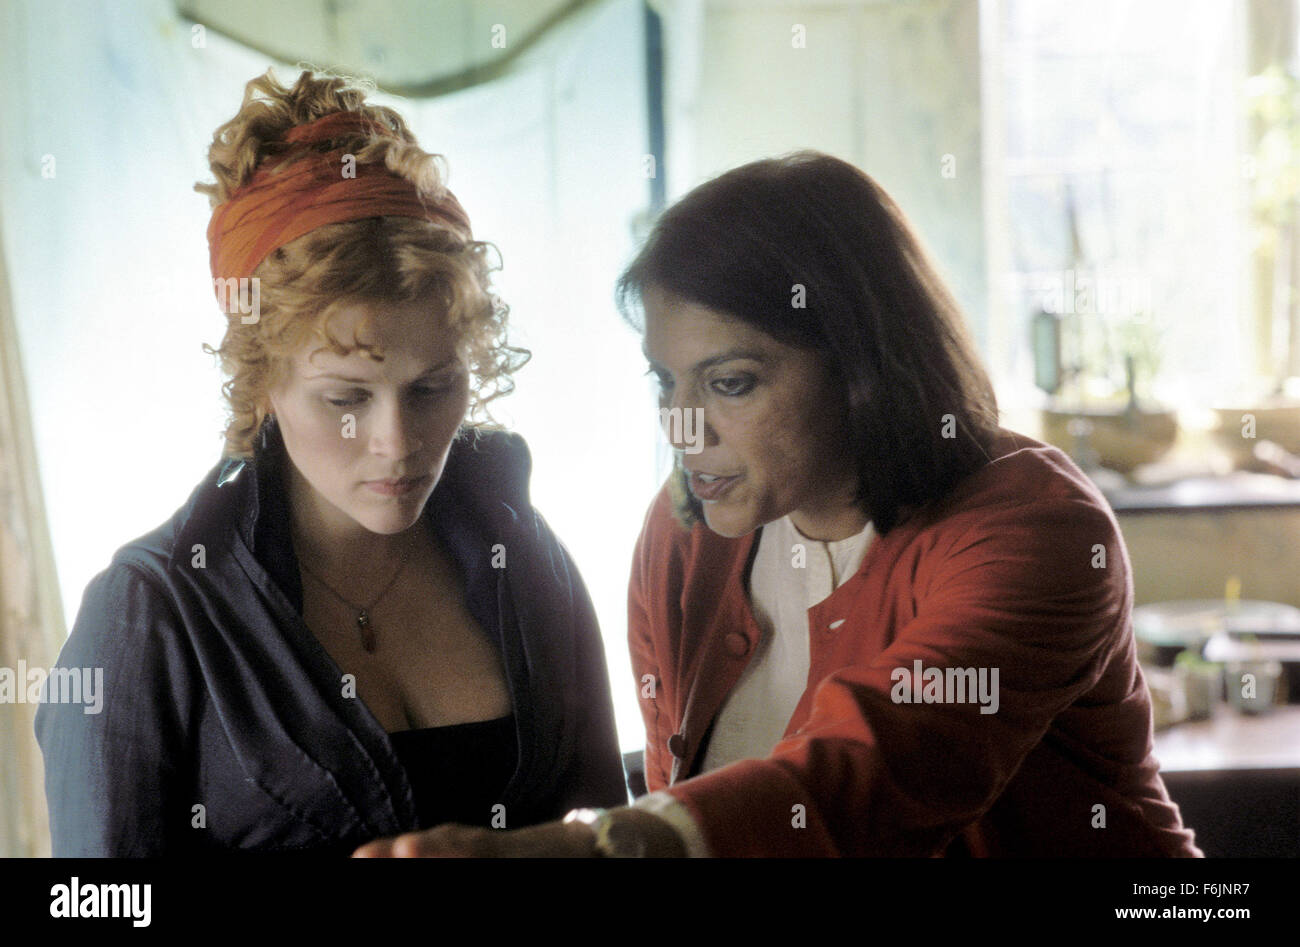 RELEASE DATE: September 1, 2004. MOVIE TITLE: Vanity Fair. STUDIO: Focus Features. PLOT: Growing up poor in London, Becky Sharp (Witherspoon) defies her poverty-stricken background and ascends the social ladder alongside her best friend, Amelia. PICTURED: Director MIRA NAIR goes over a scene with actress RESSE WITHERSPOON. Stock Photo